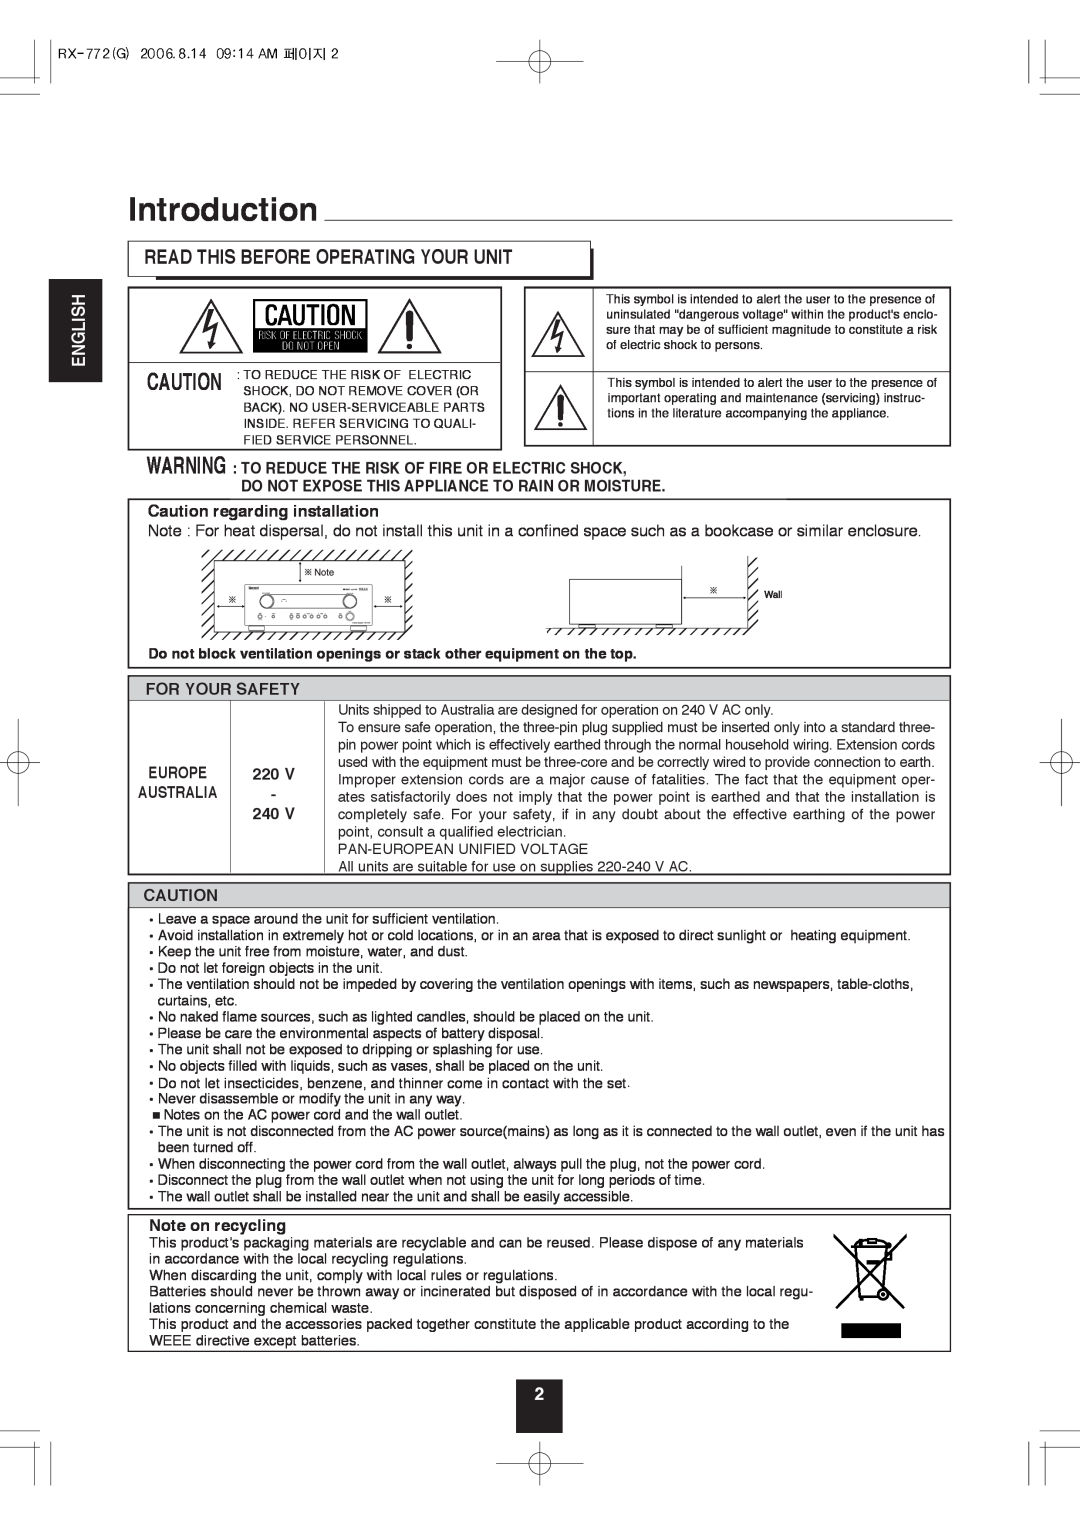 Sherwood RX-772 manual Introduction, Read This Before Operating Your Unit, English, Caution regarding installation, 220V 